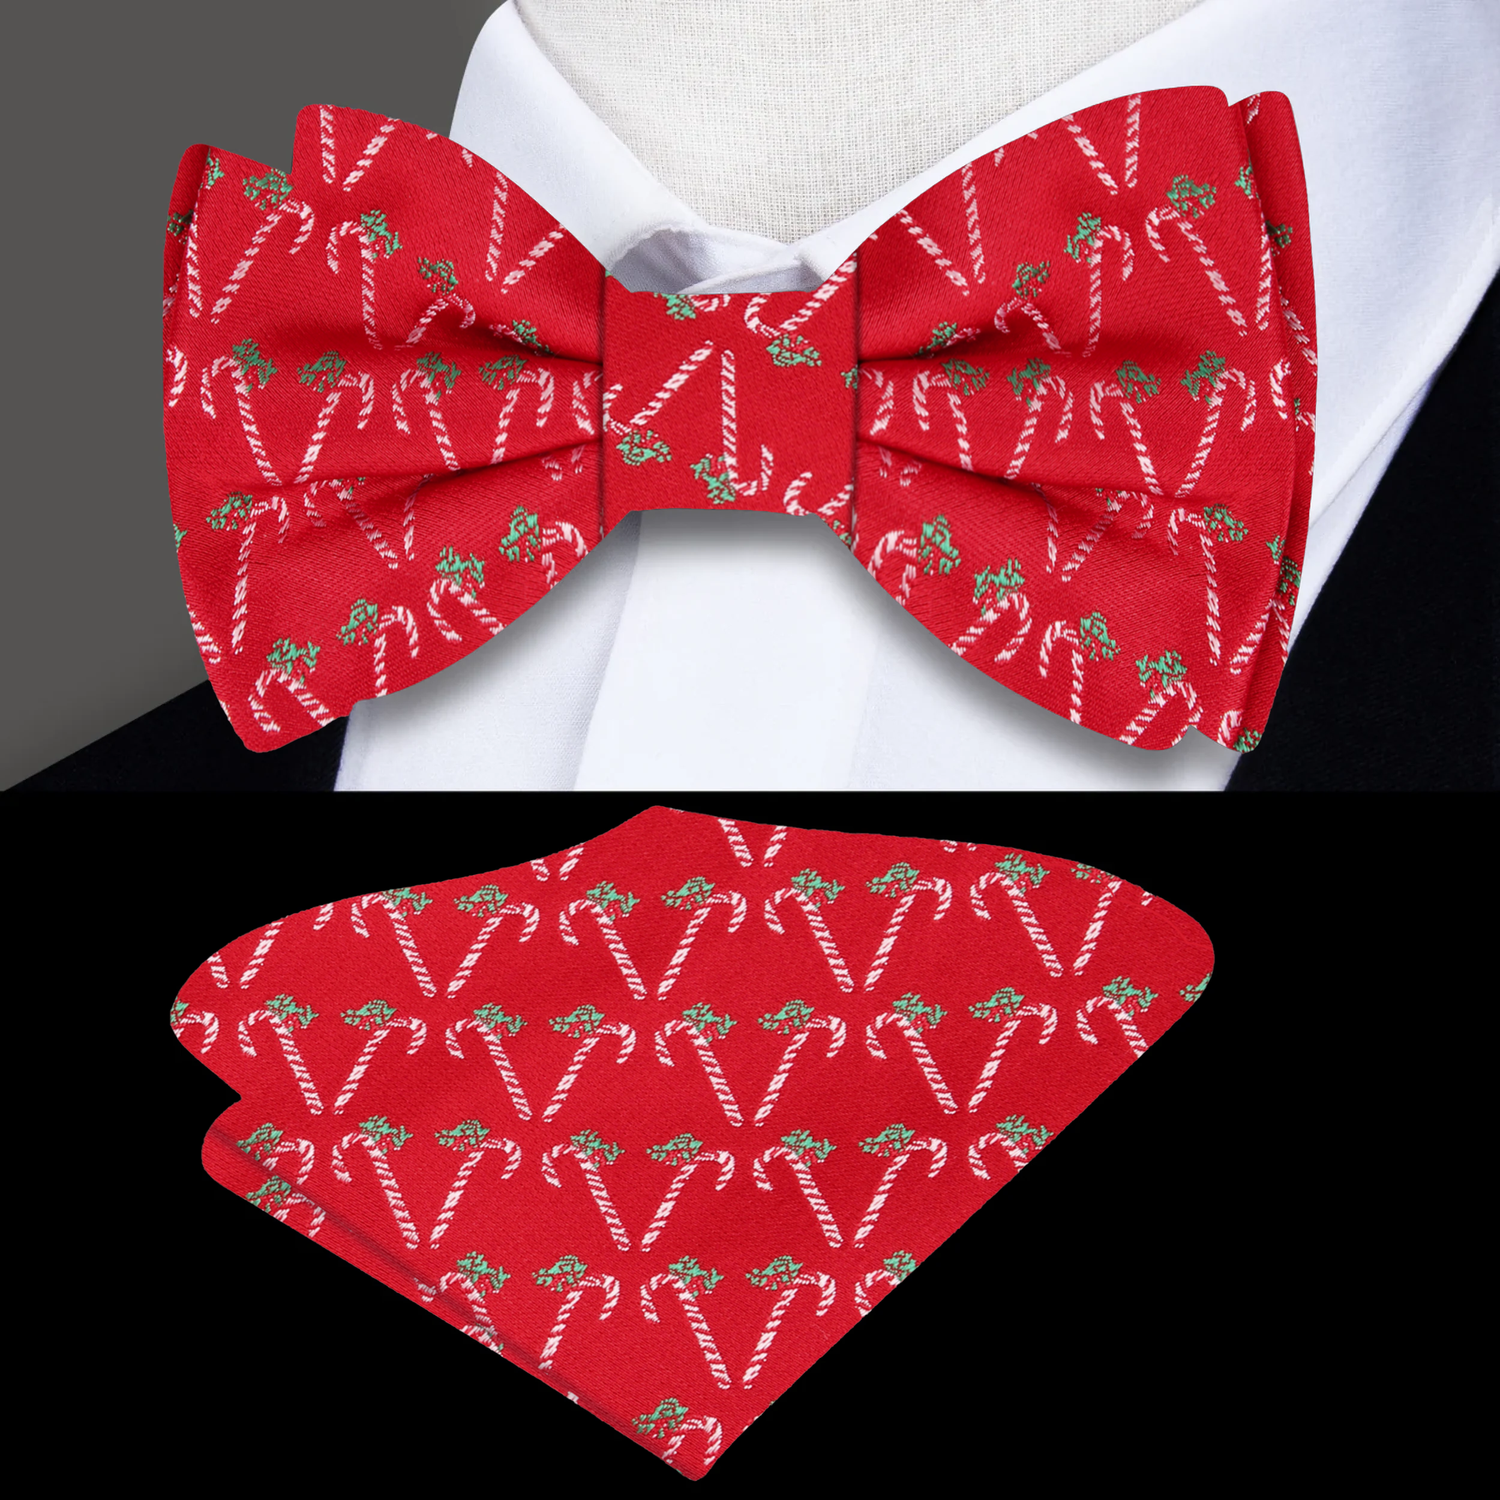 Red, White and Green Candy Cane Bow Tie and Pocket Square